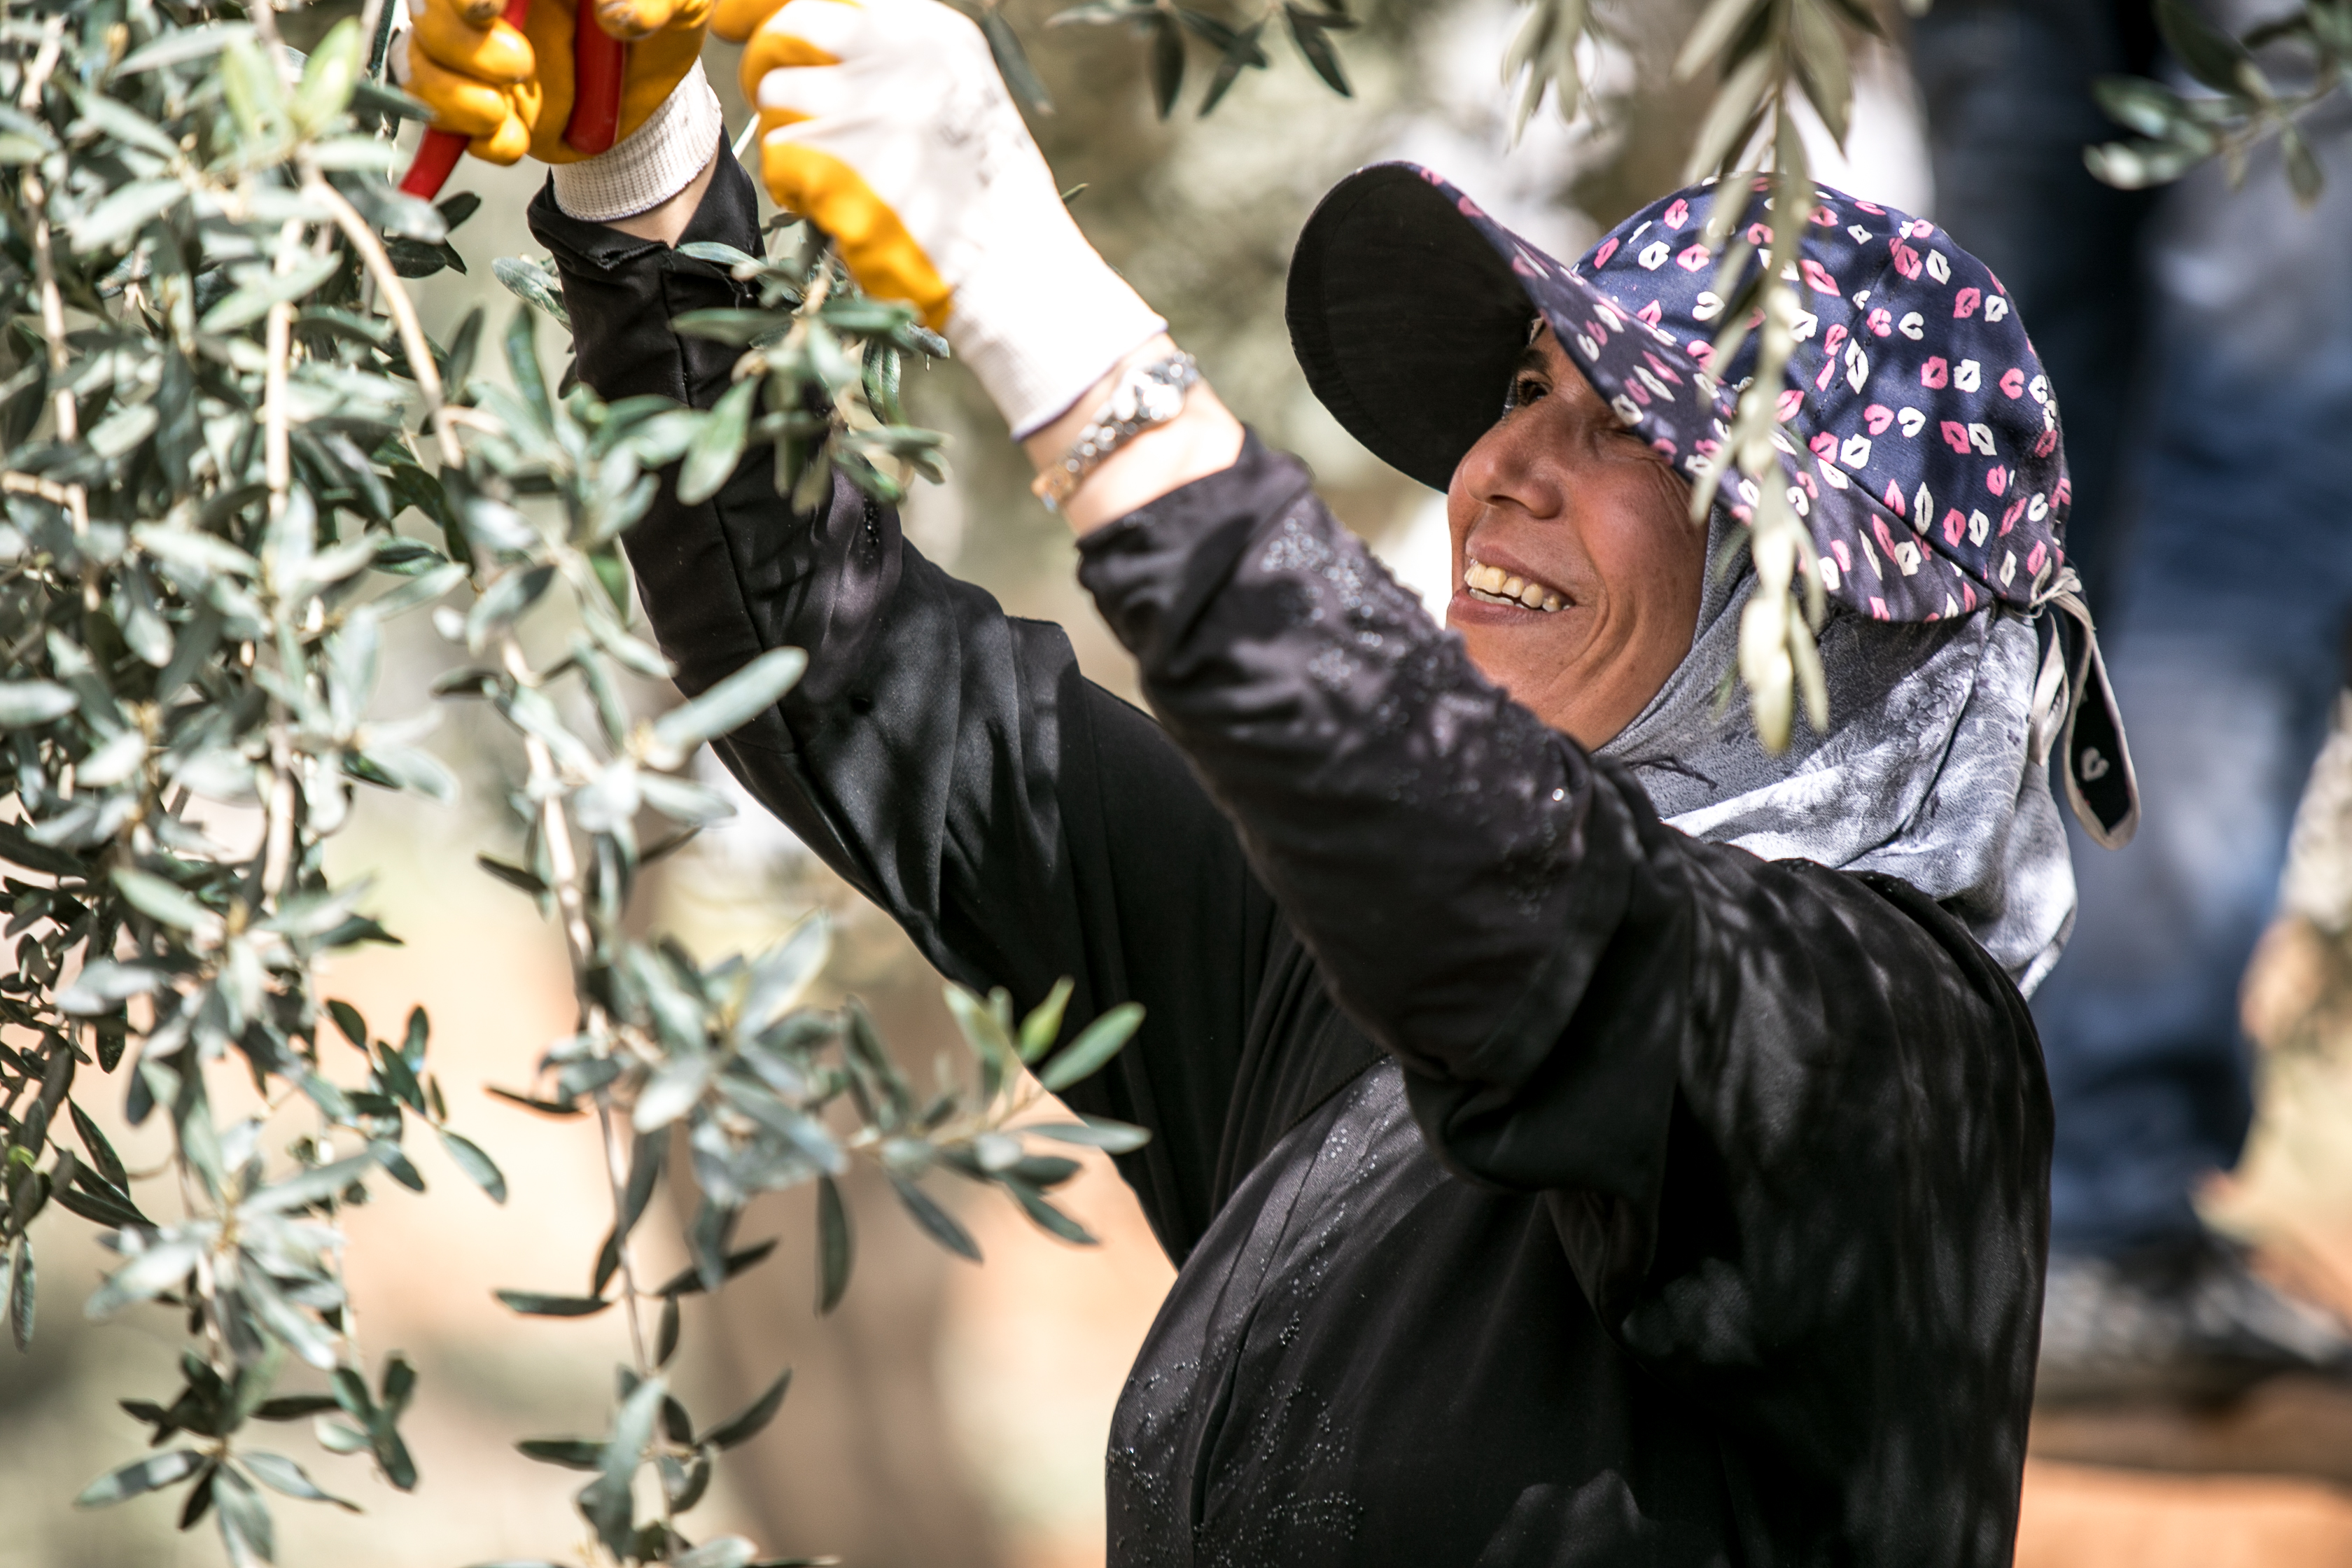 A woman pruning an olive tree